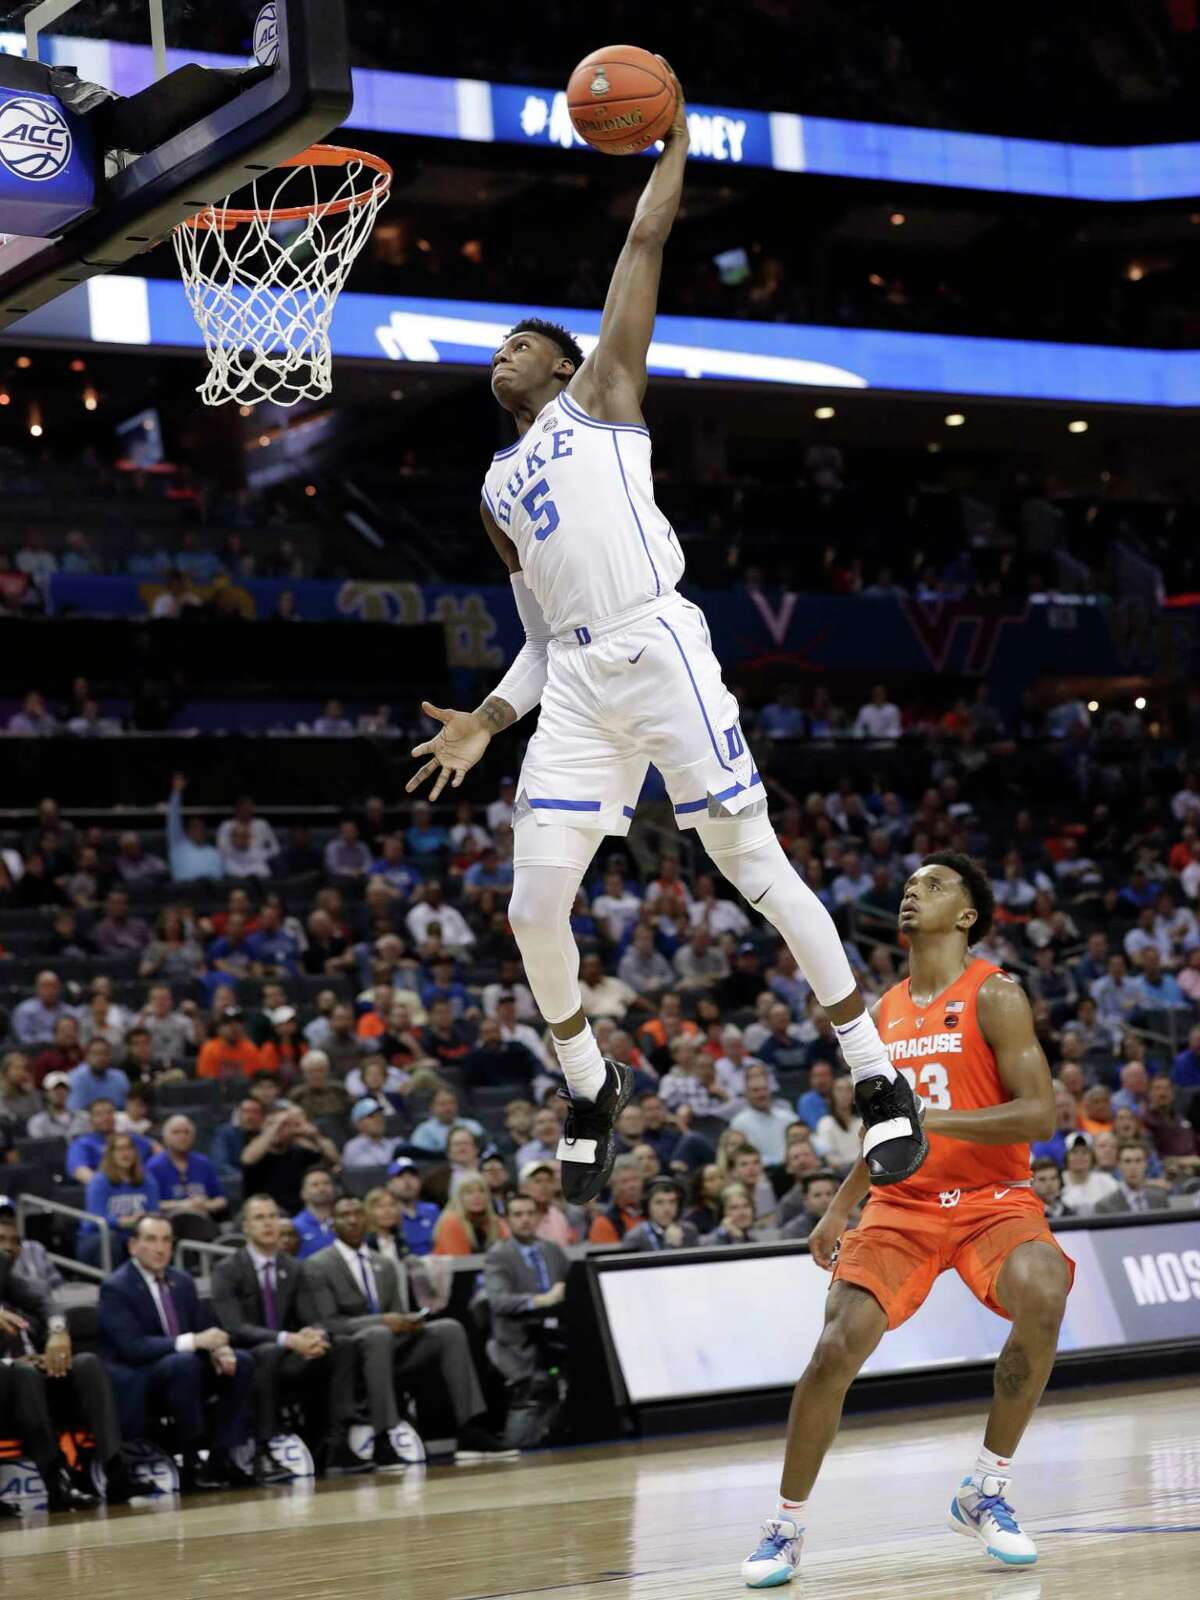 Compensating college athletes — Duke’s RJ Barrett comes to mind — would benefit players, college teams, pro leagues and fans.